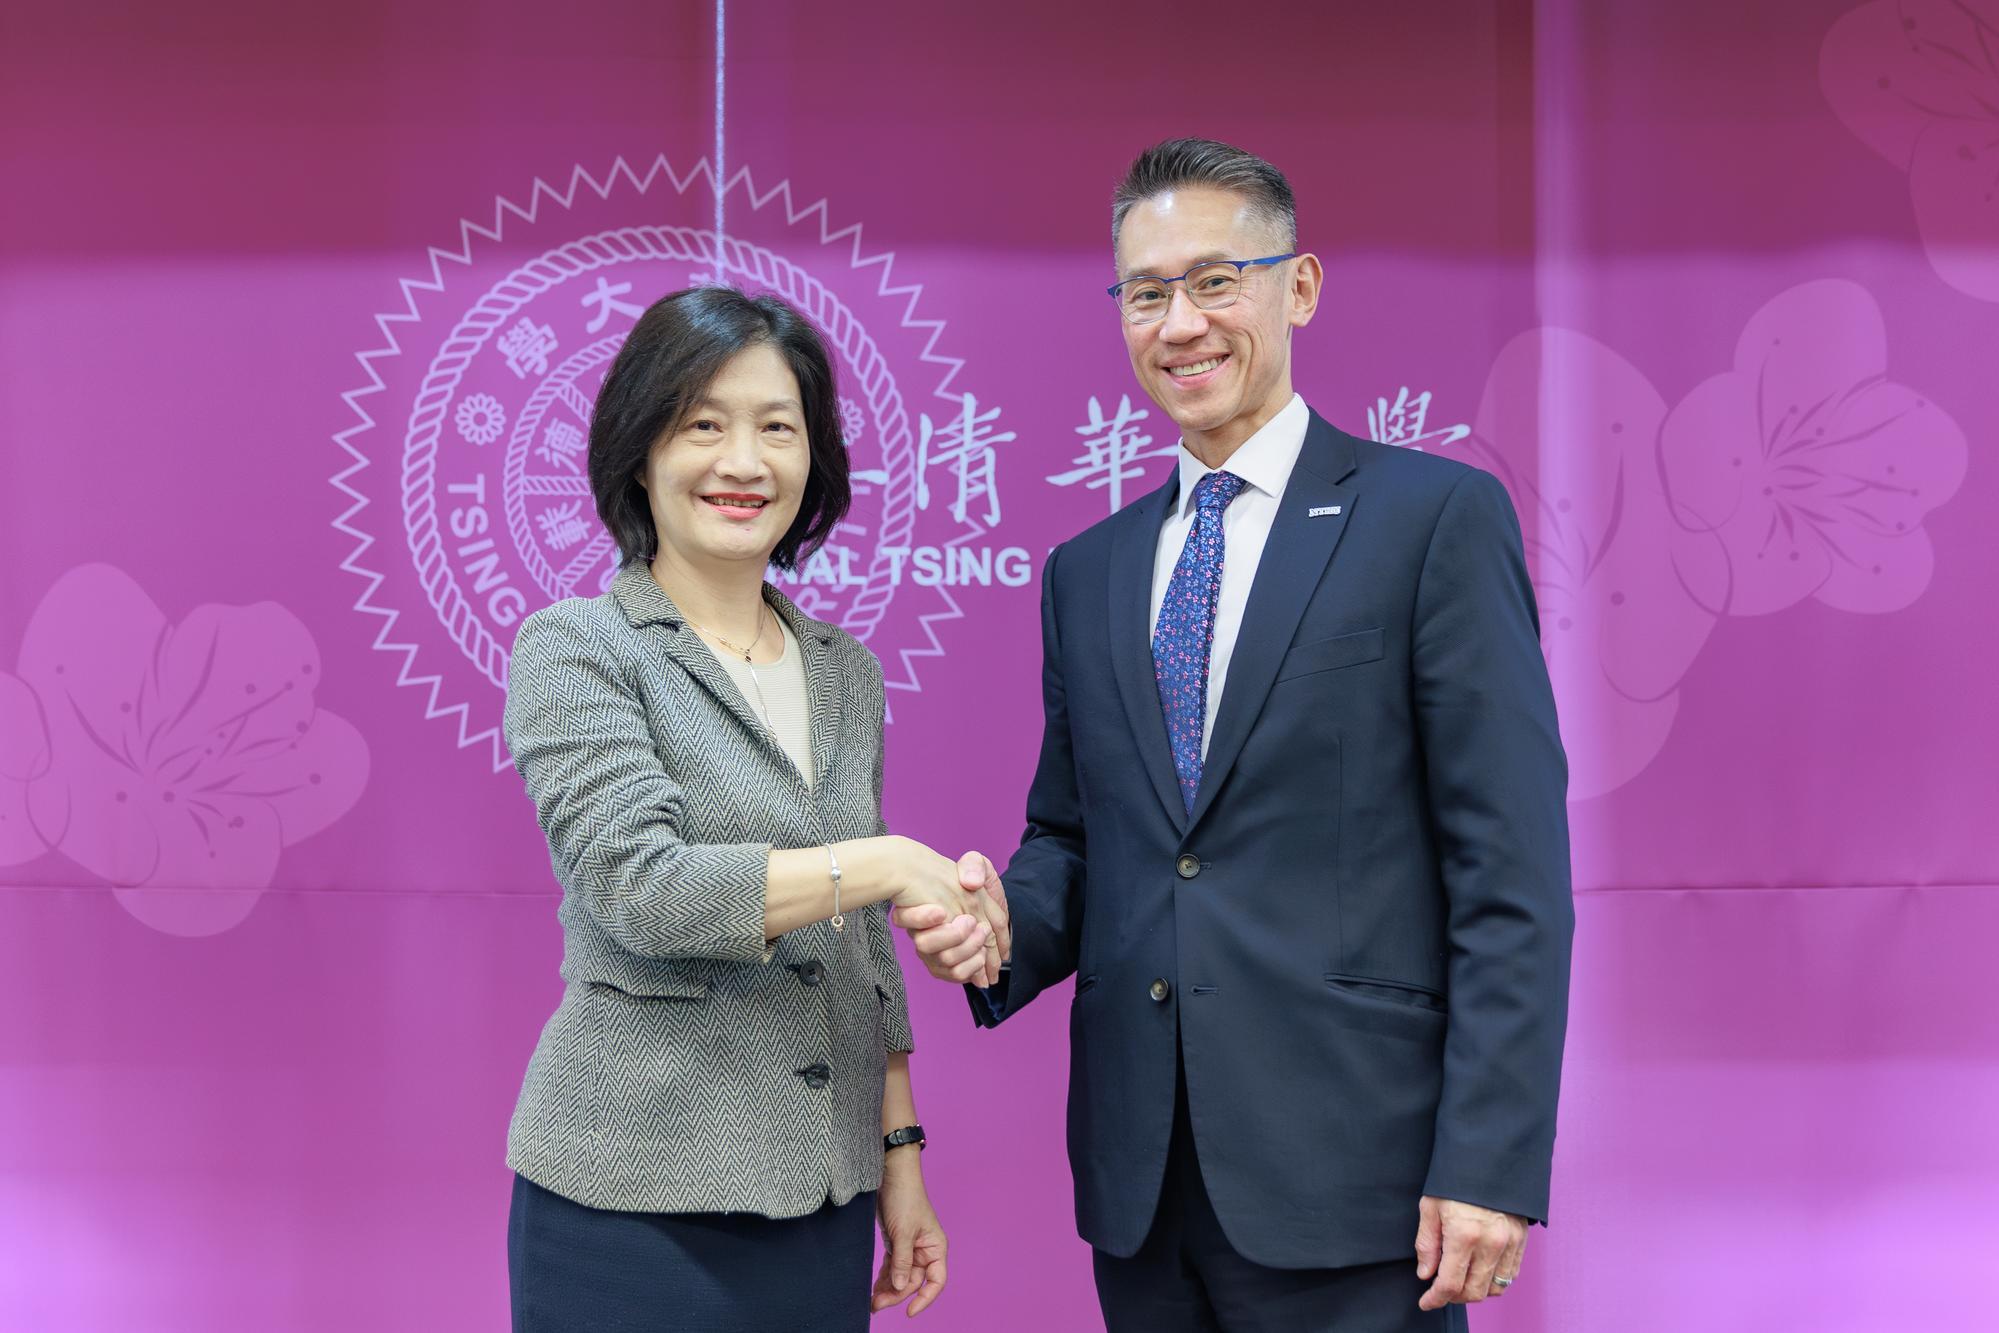 President W. John Kao (高為元) (right) and Eunice Chiu (邱麗孟), NVIDIA Vice President and General Manager Taiwan, anticipate more interdisciplinary cooperation in the future.